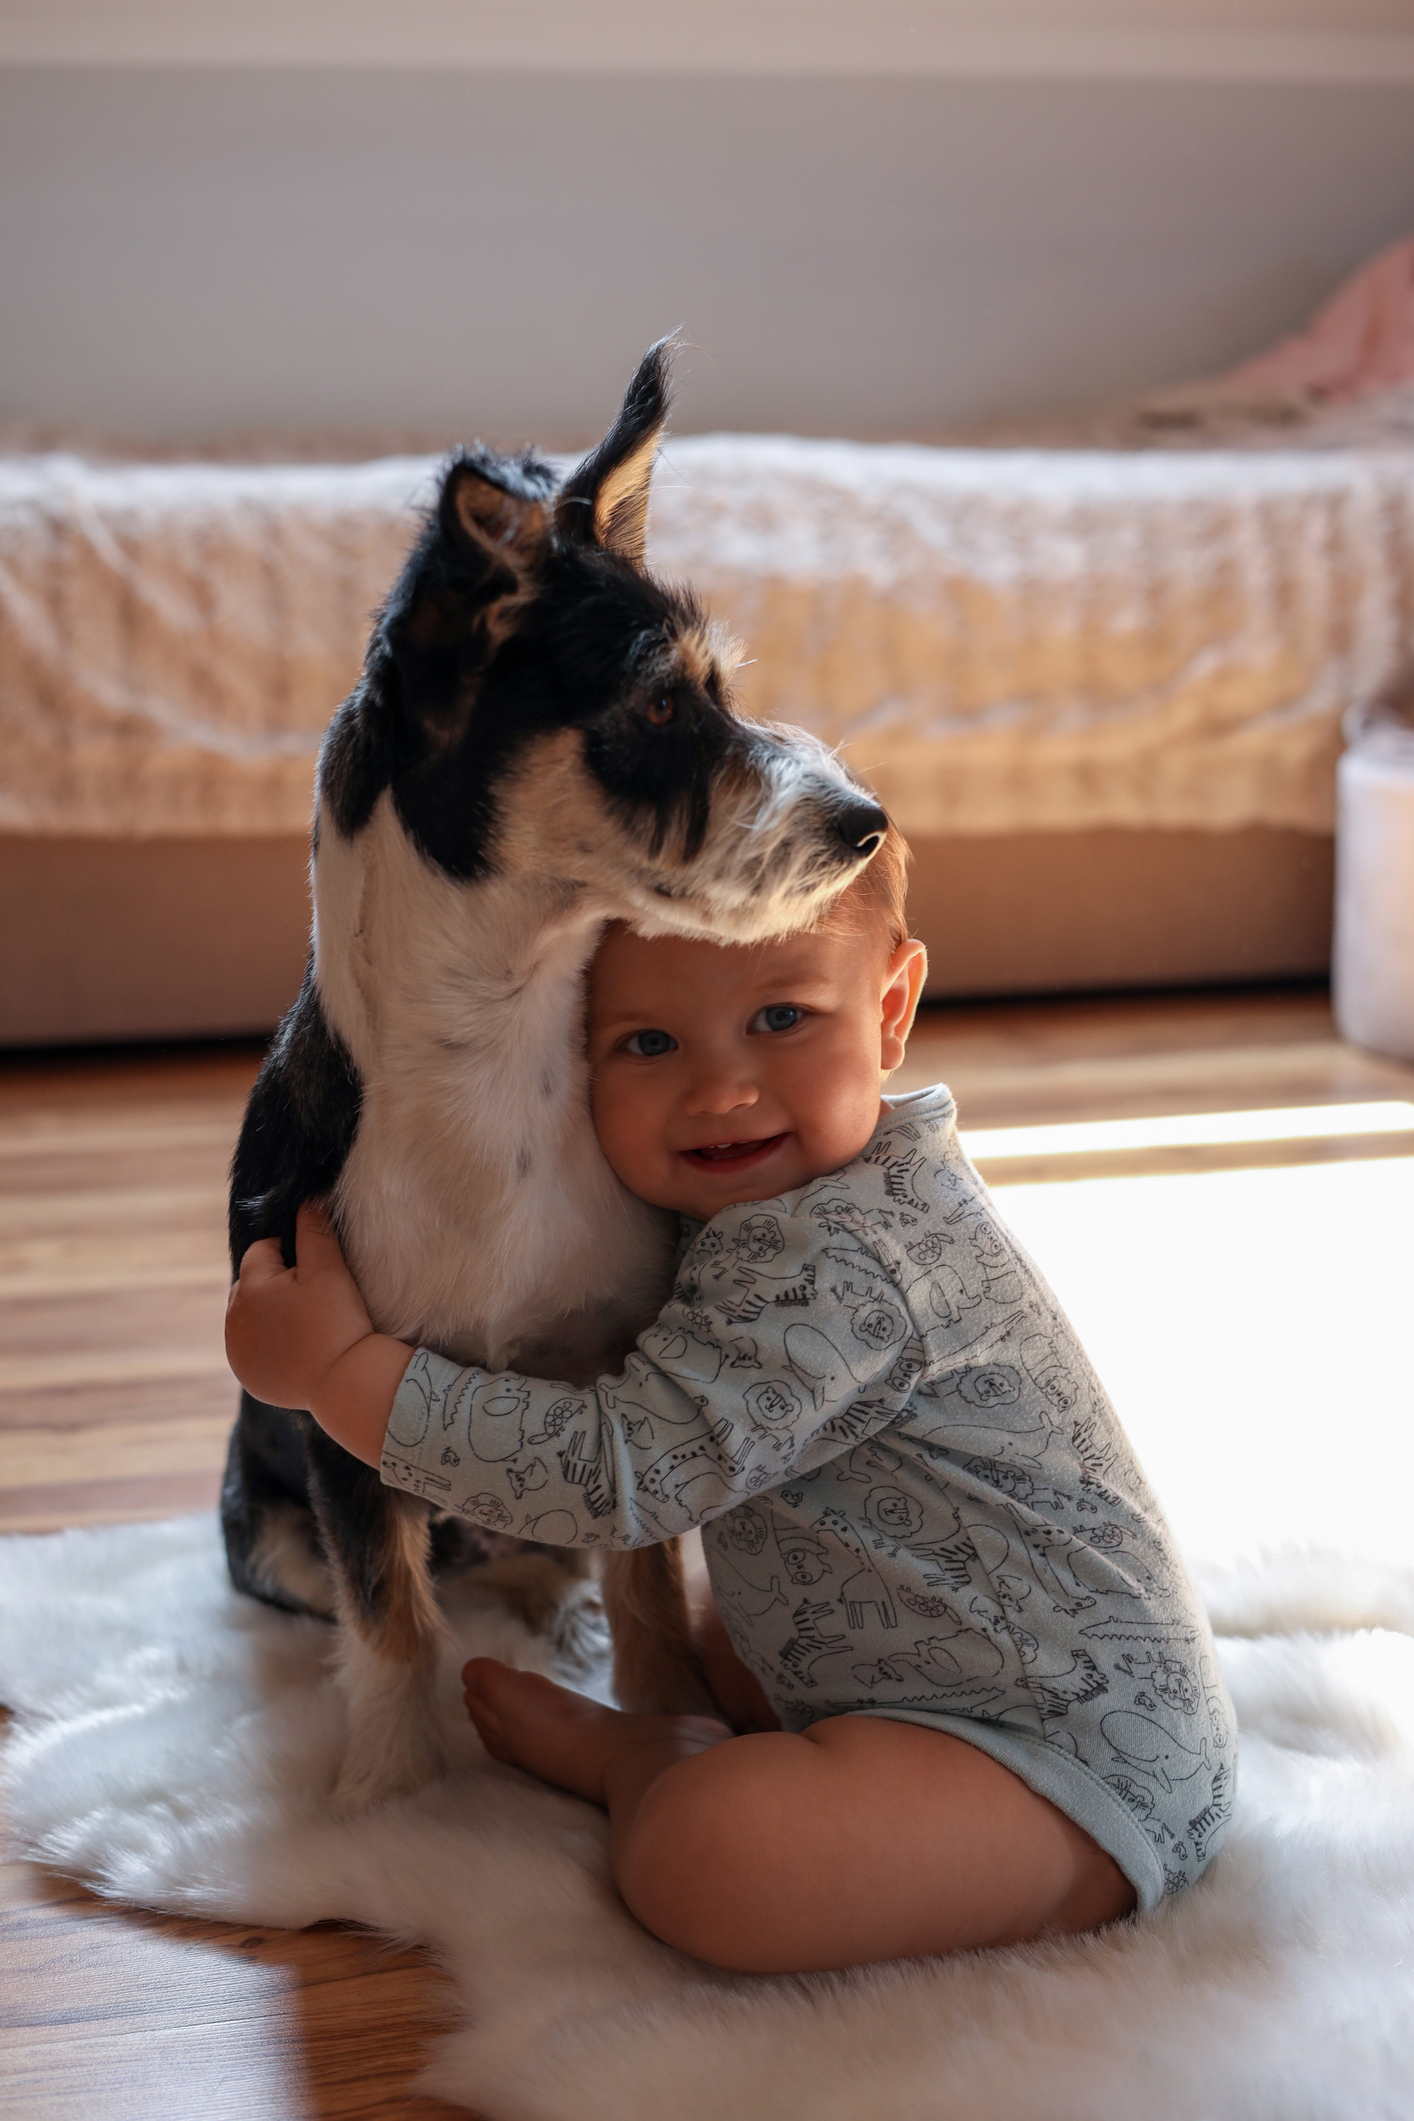 Toddler embracing a small goat indoors, conveying a sense of childhood animal bonding